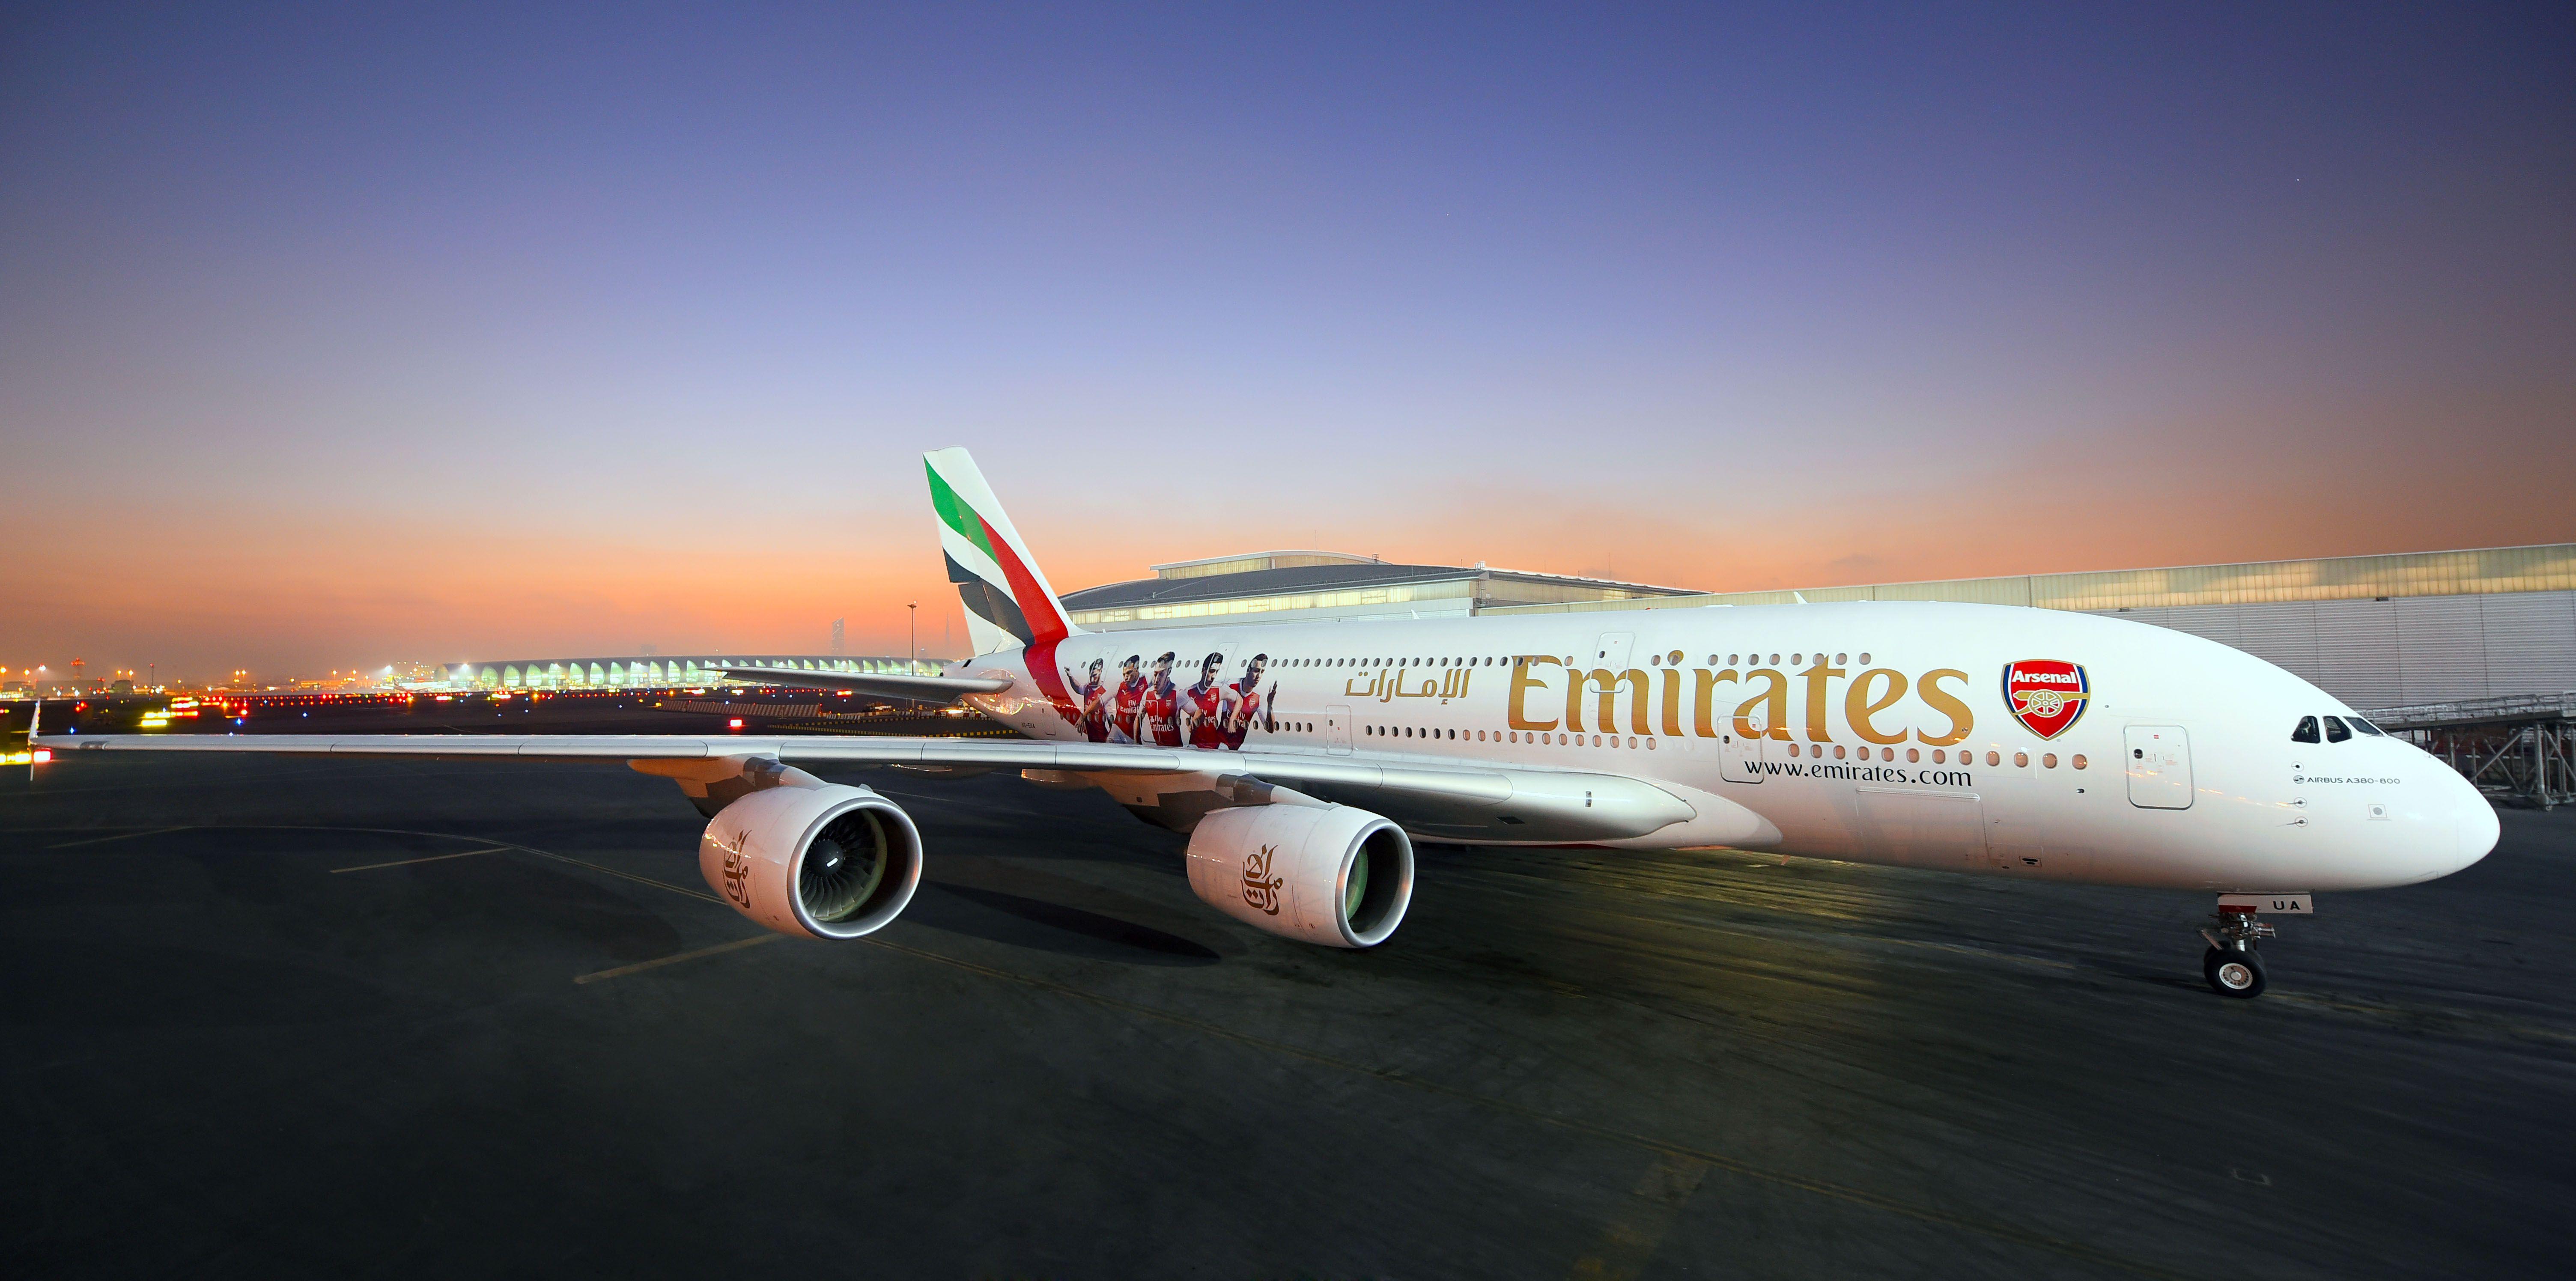 Emirates Airline Wallpapers - Wallpaper Cave